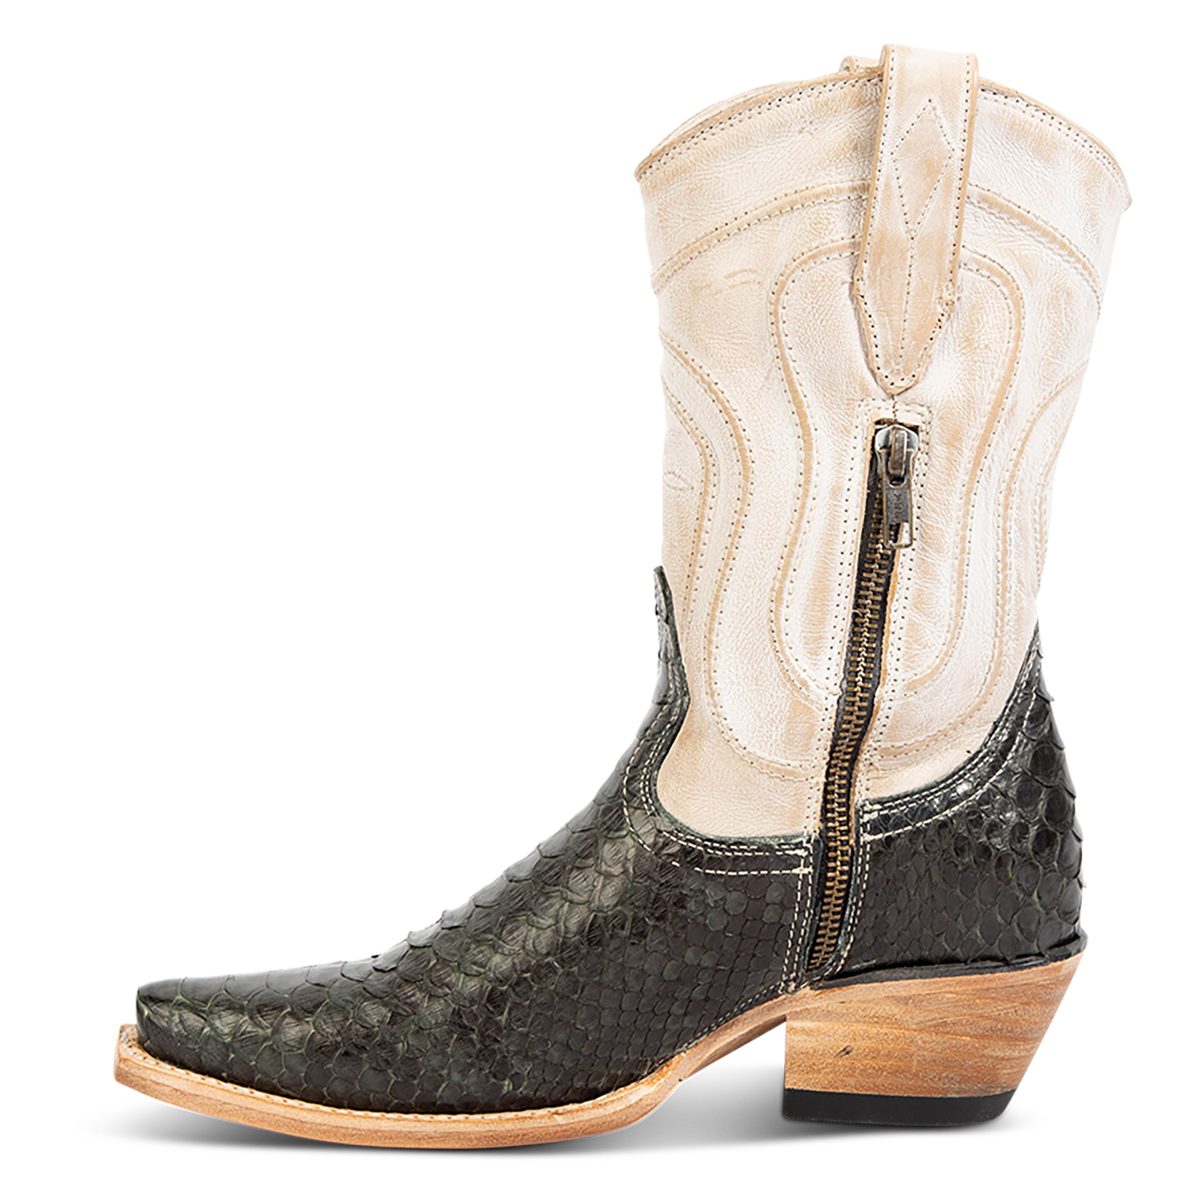 Inside view showing working brass zipper on FREEBIRD women's Warrick olive python multi exotic leather western cowgirl mid calf boot